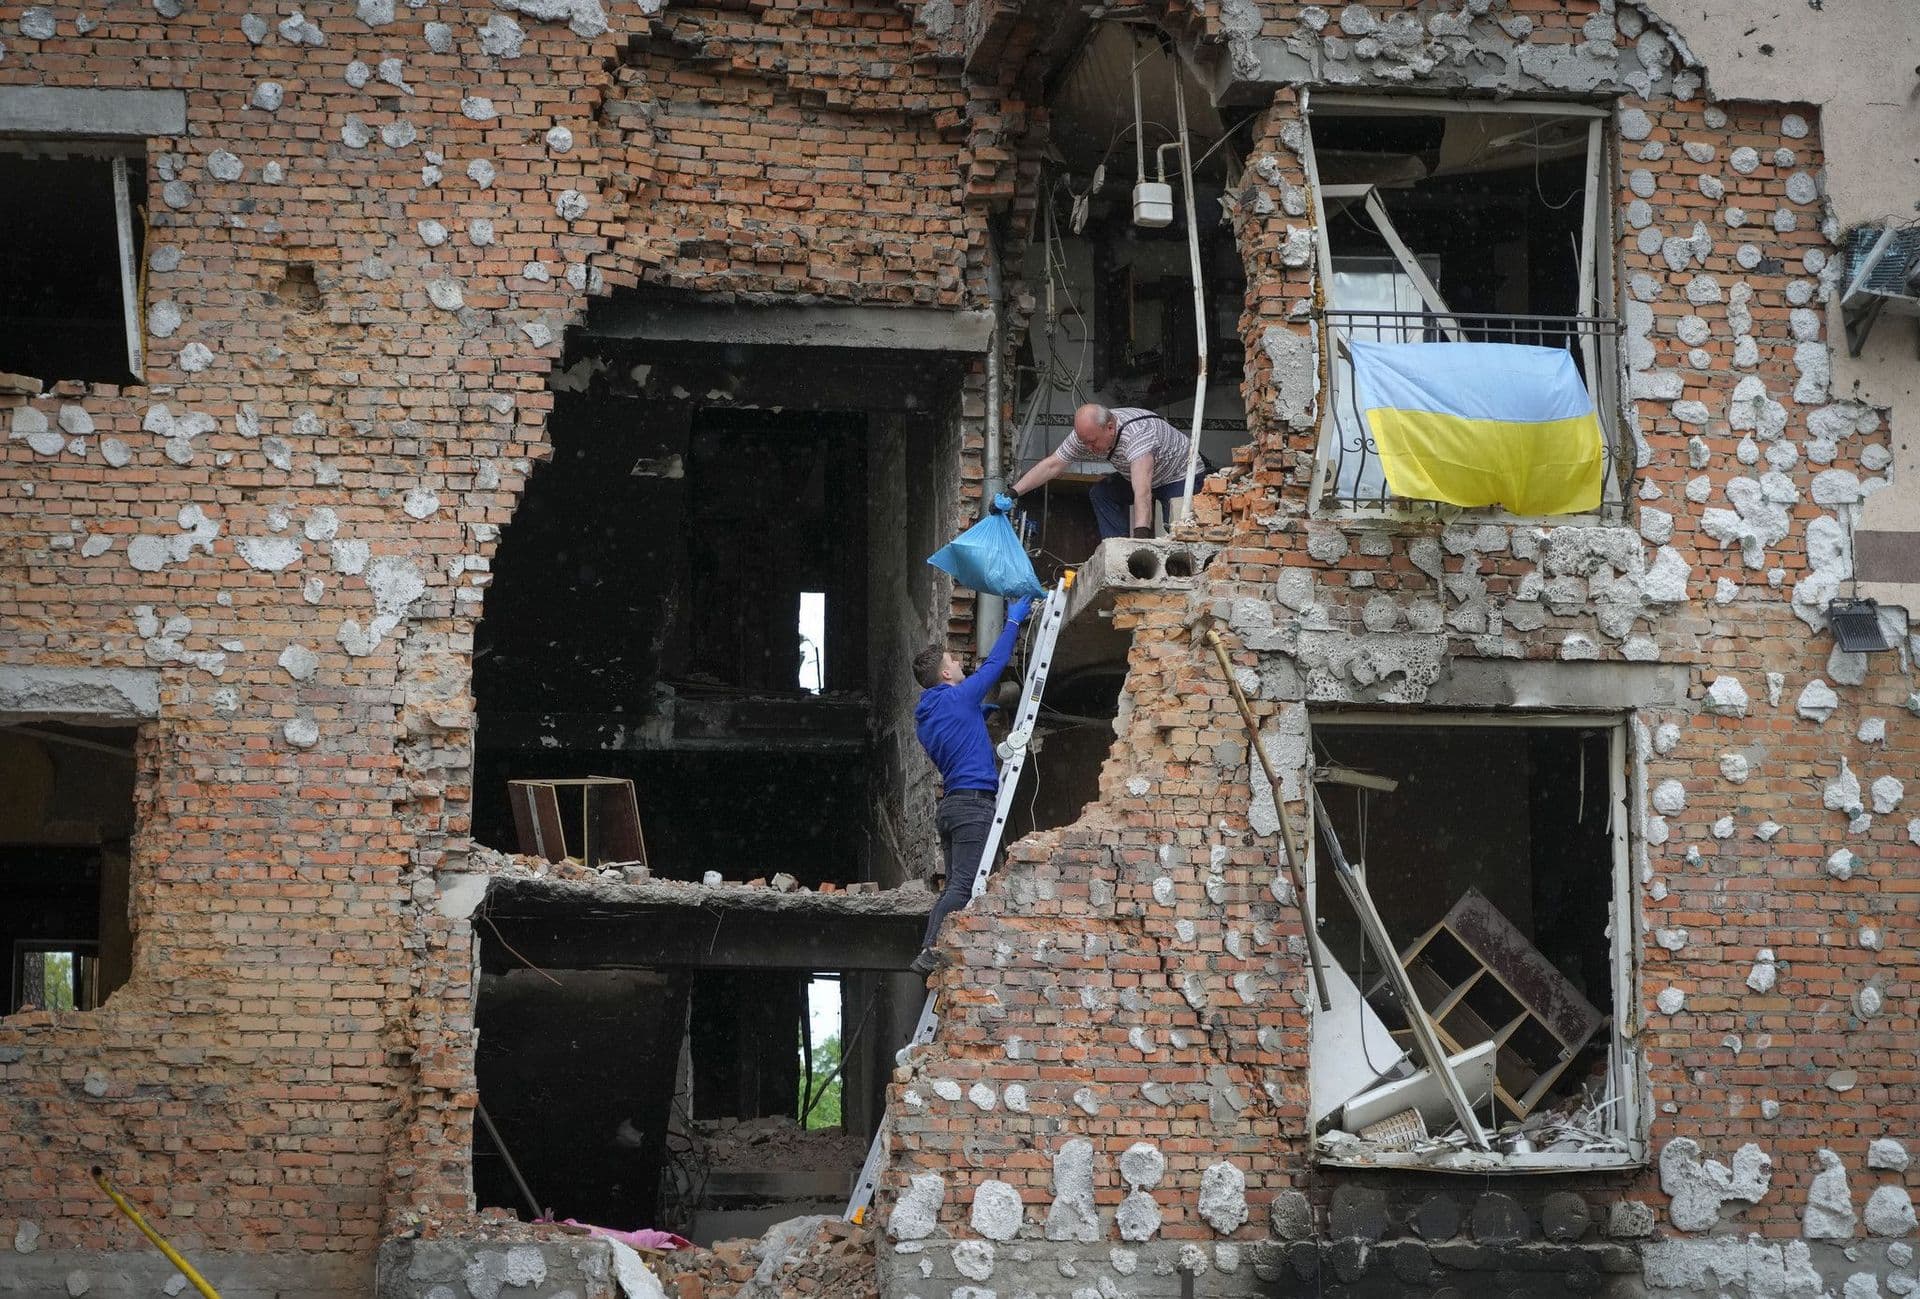 Residents take out their belongings from their house ruined by the Russian shelling in Irpin